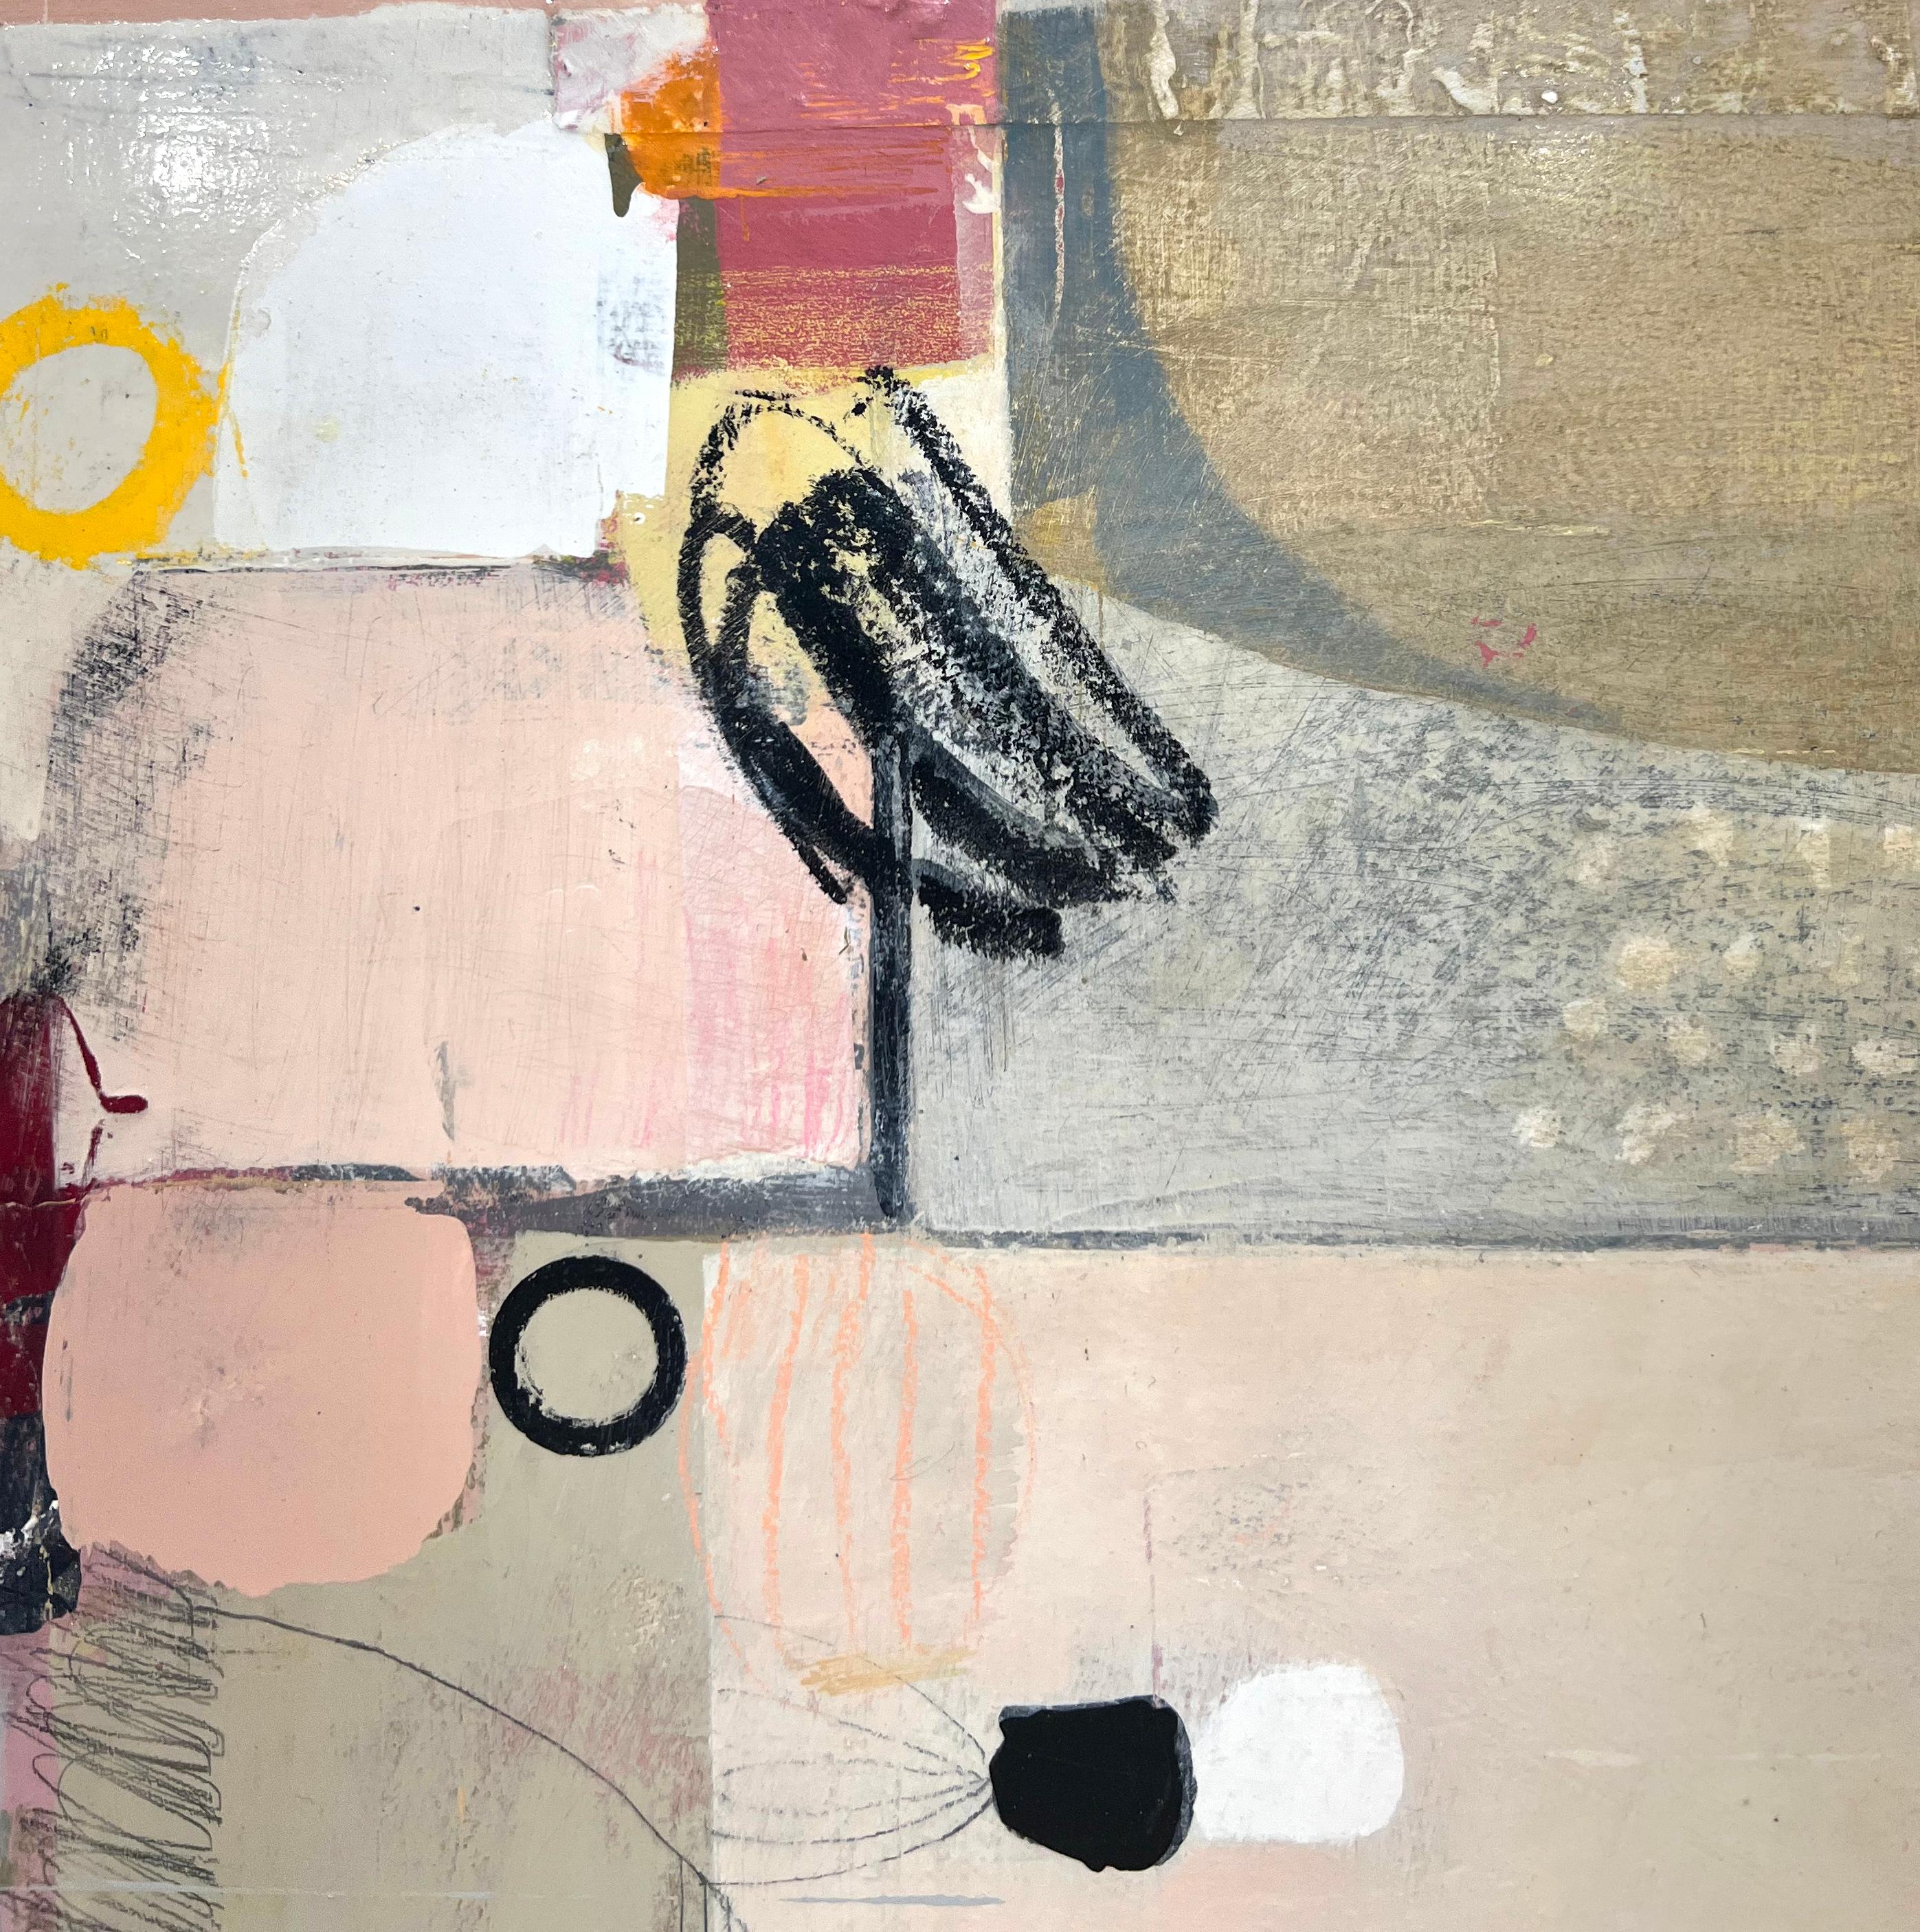 This abstract collage painting is made with mixed media on panel. It features a multicolored palette, with geometric and abstract shapes collaged and painted together in varying tones of yellow, pink, grey, orange, and more. Subtle outlines of